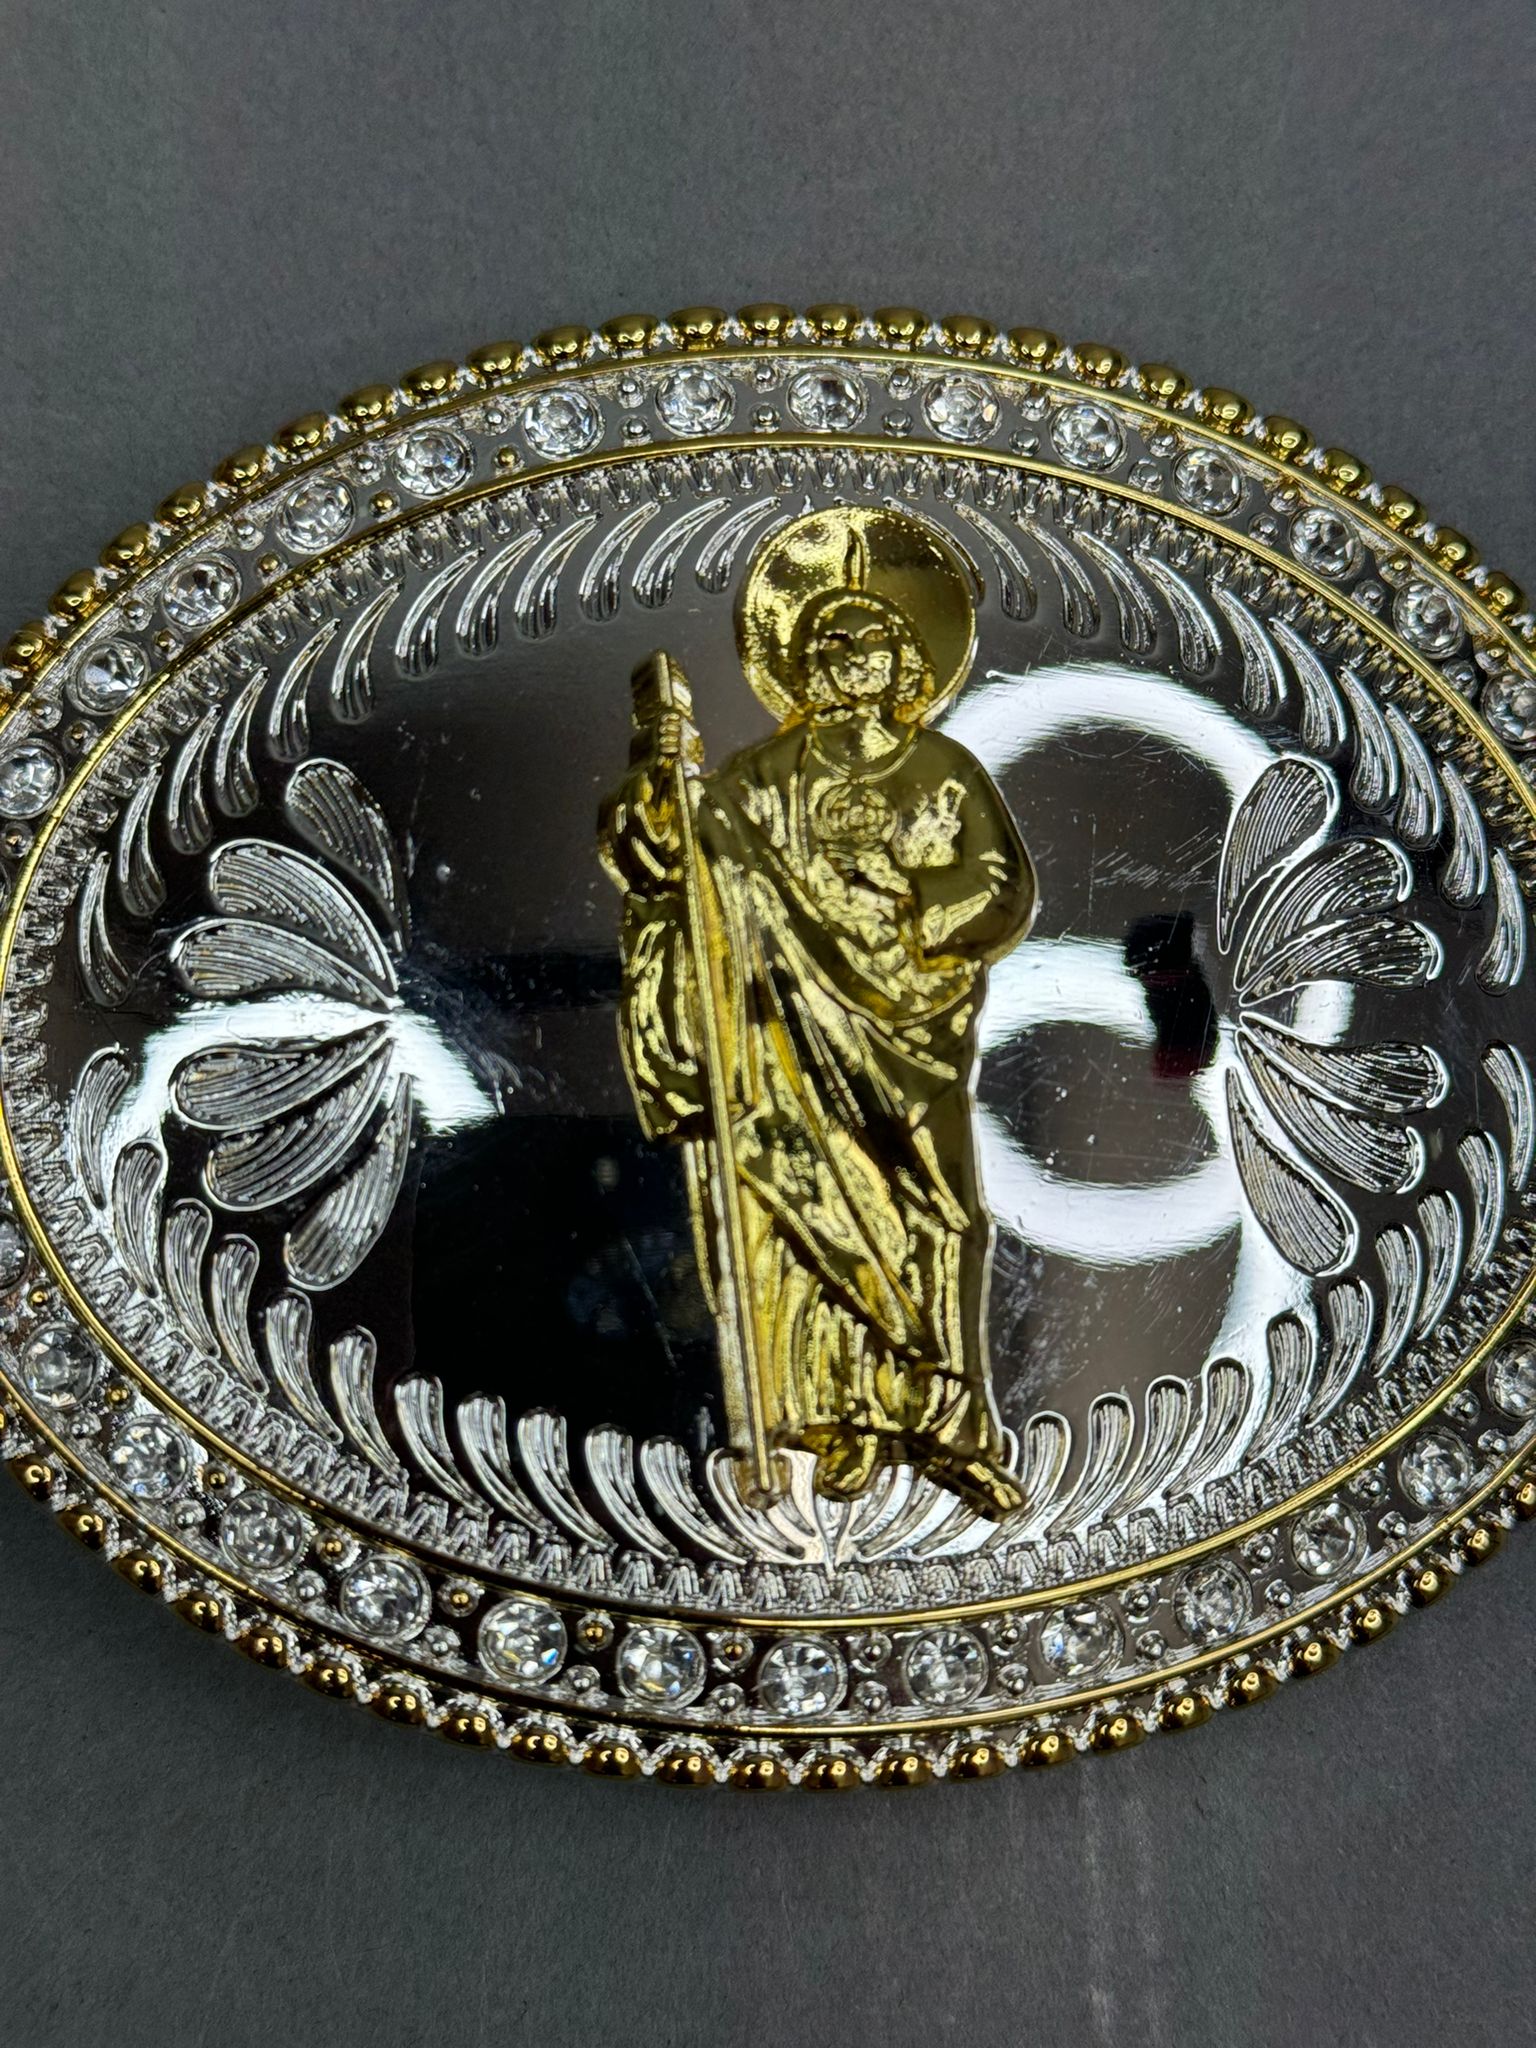 ROUND SILVER WITH GOLD STONED BORDER SAN JUDAS BUCKLE